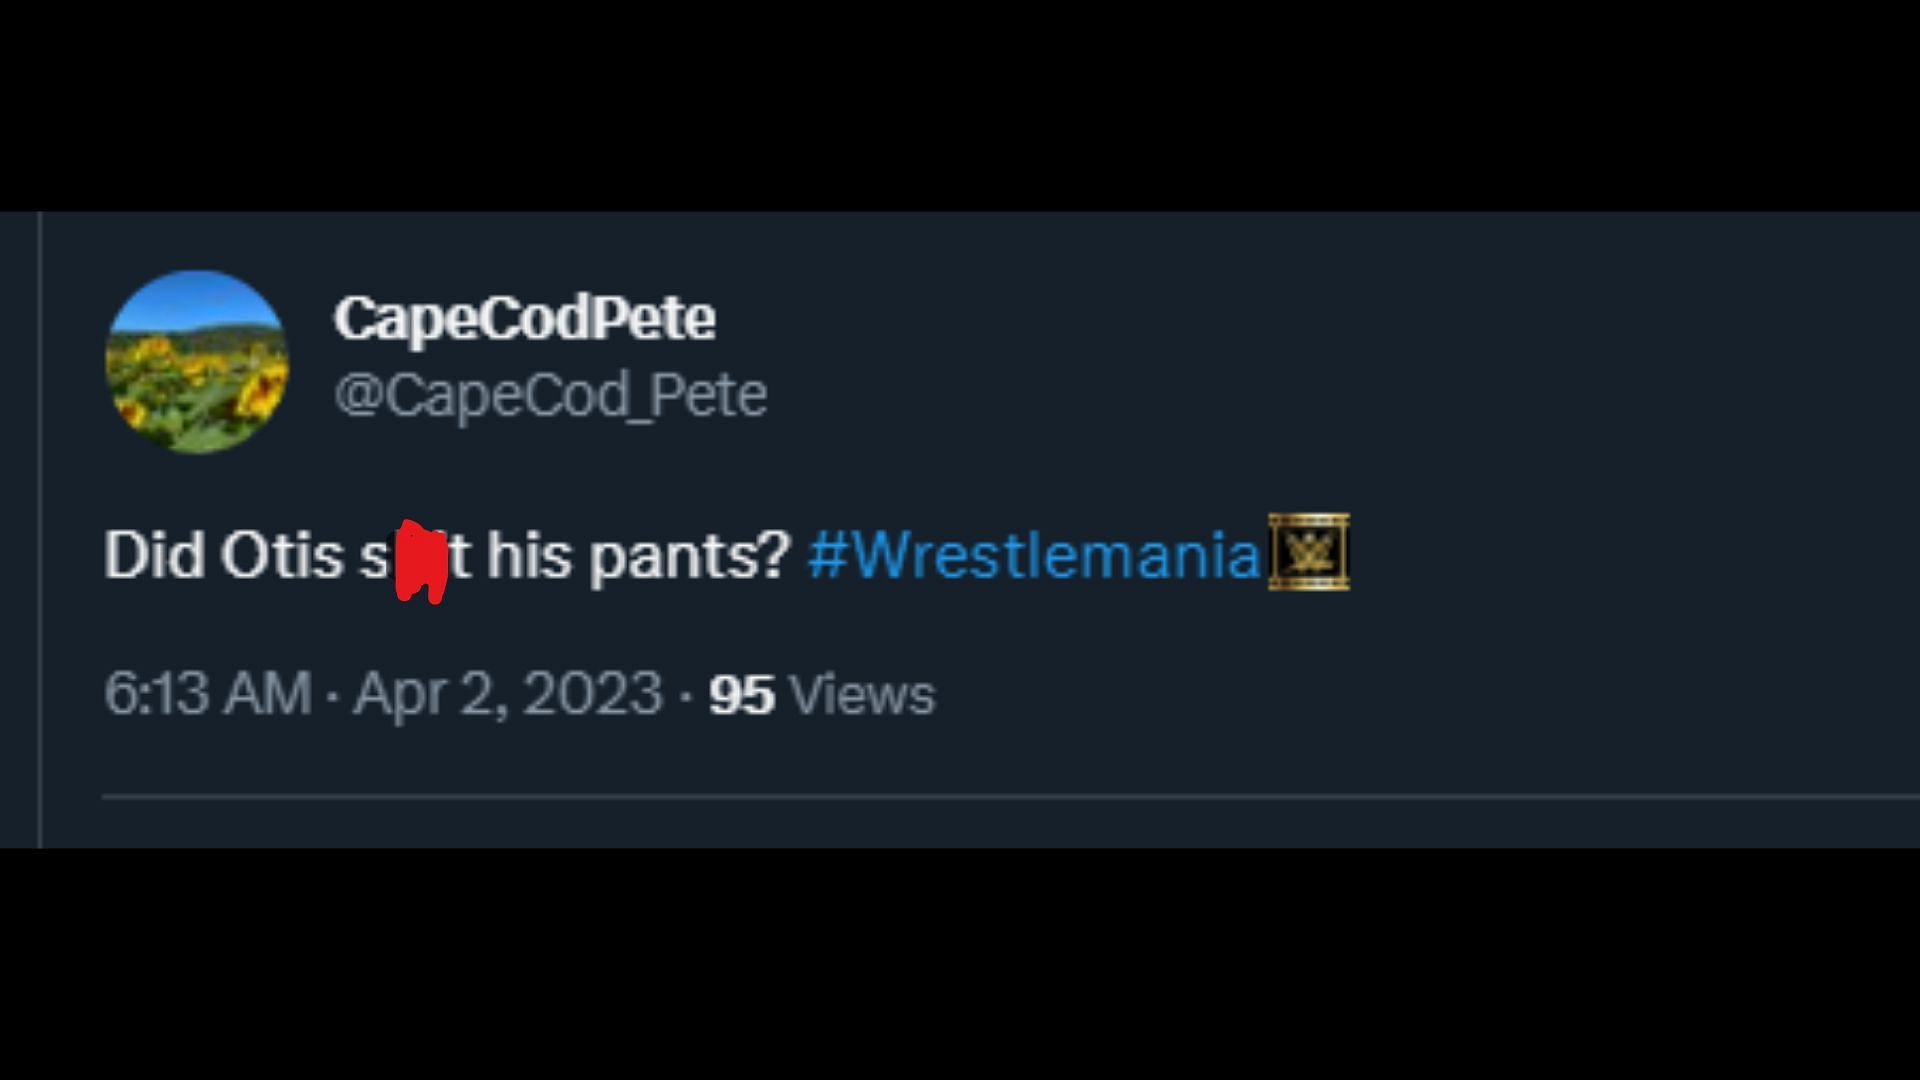 Fans were given quite the impression by Otis at WrestleMania